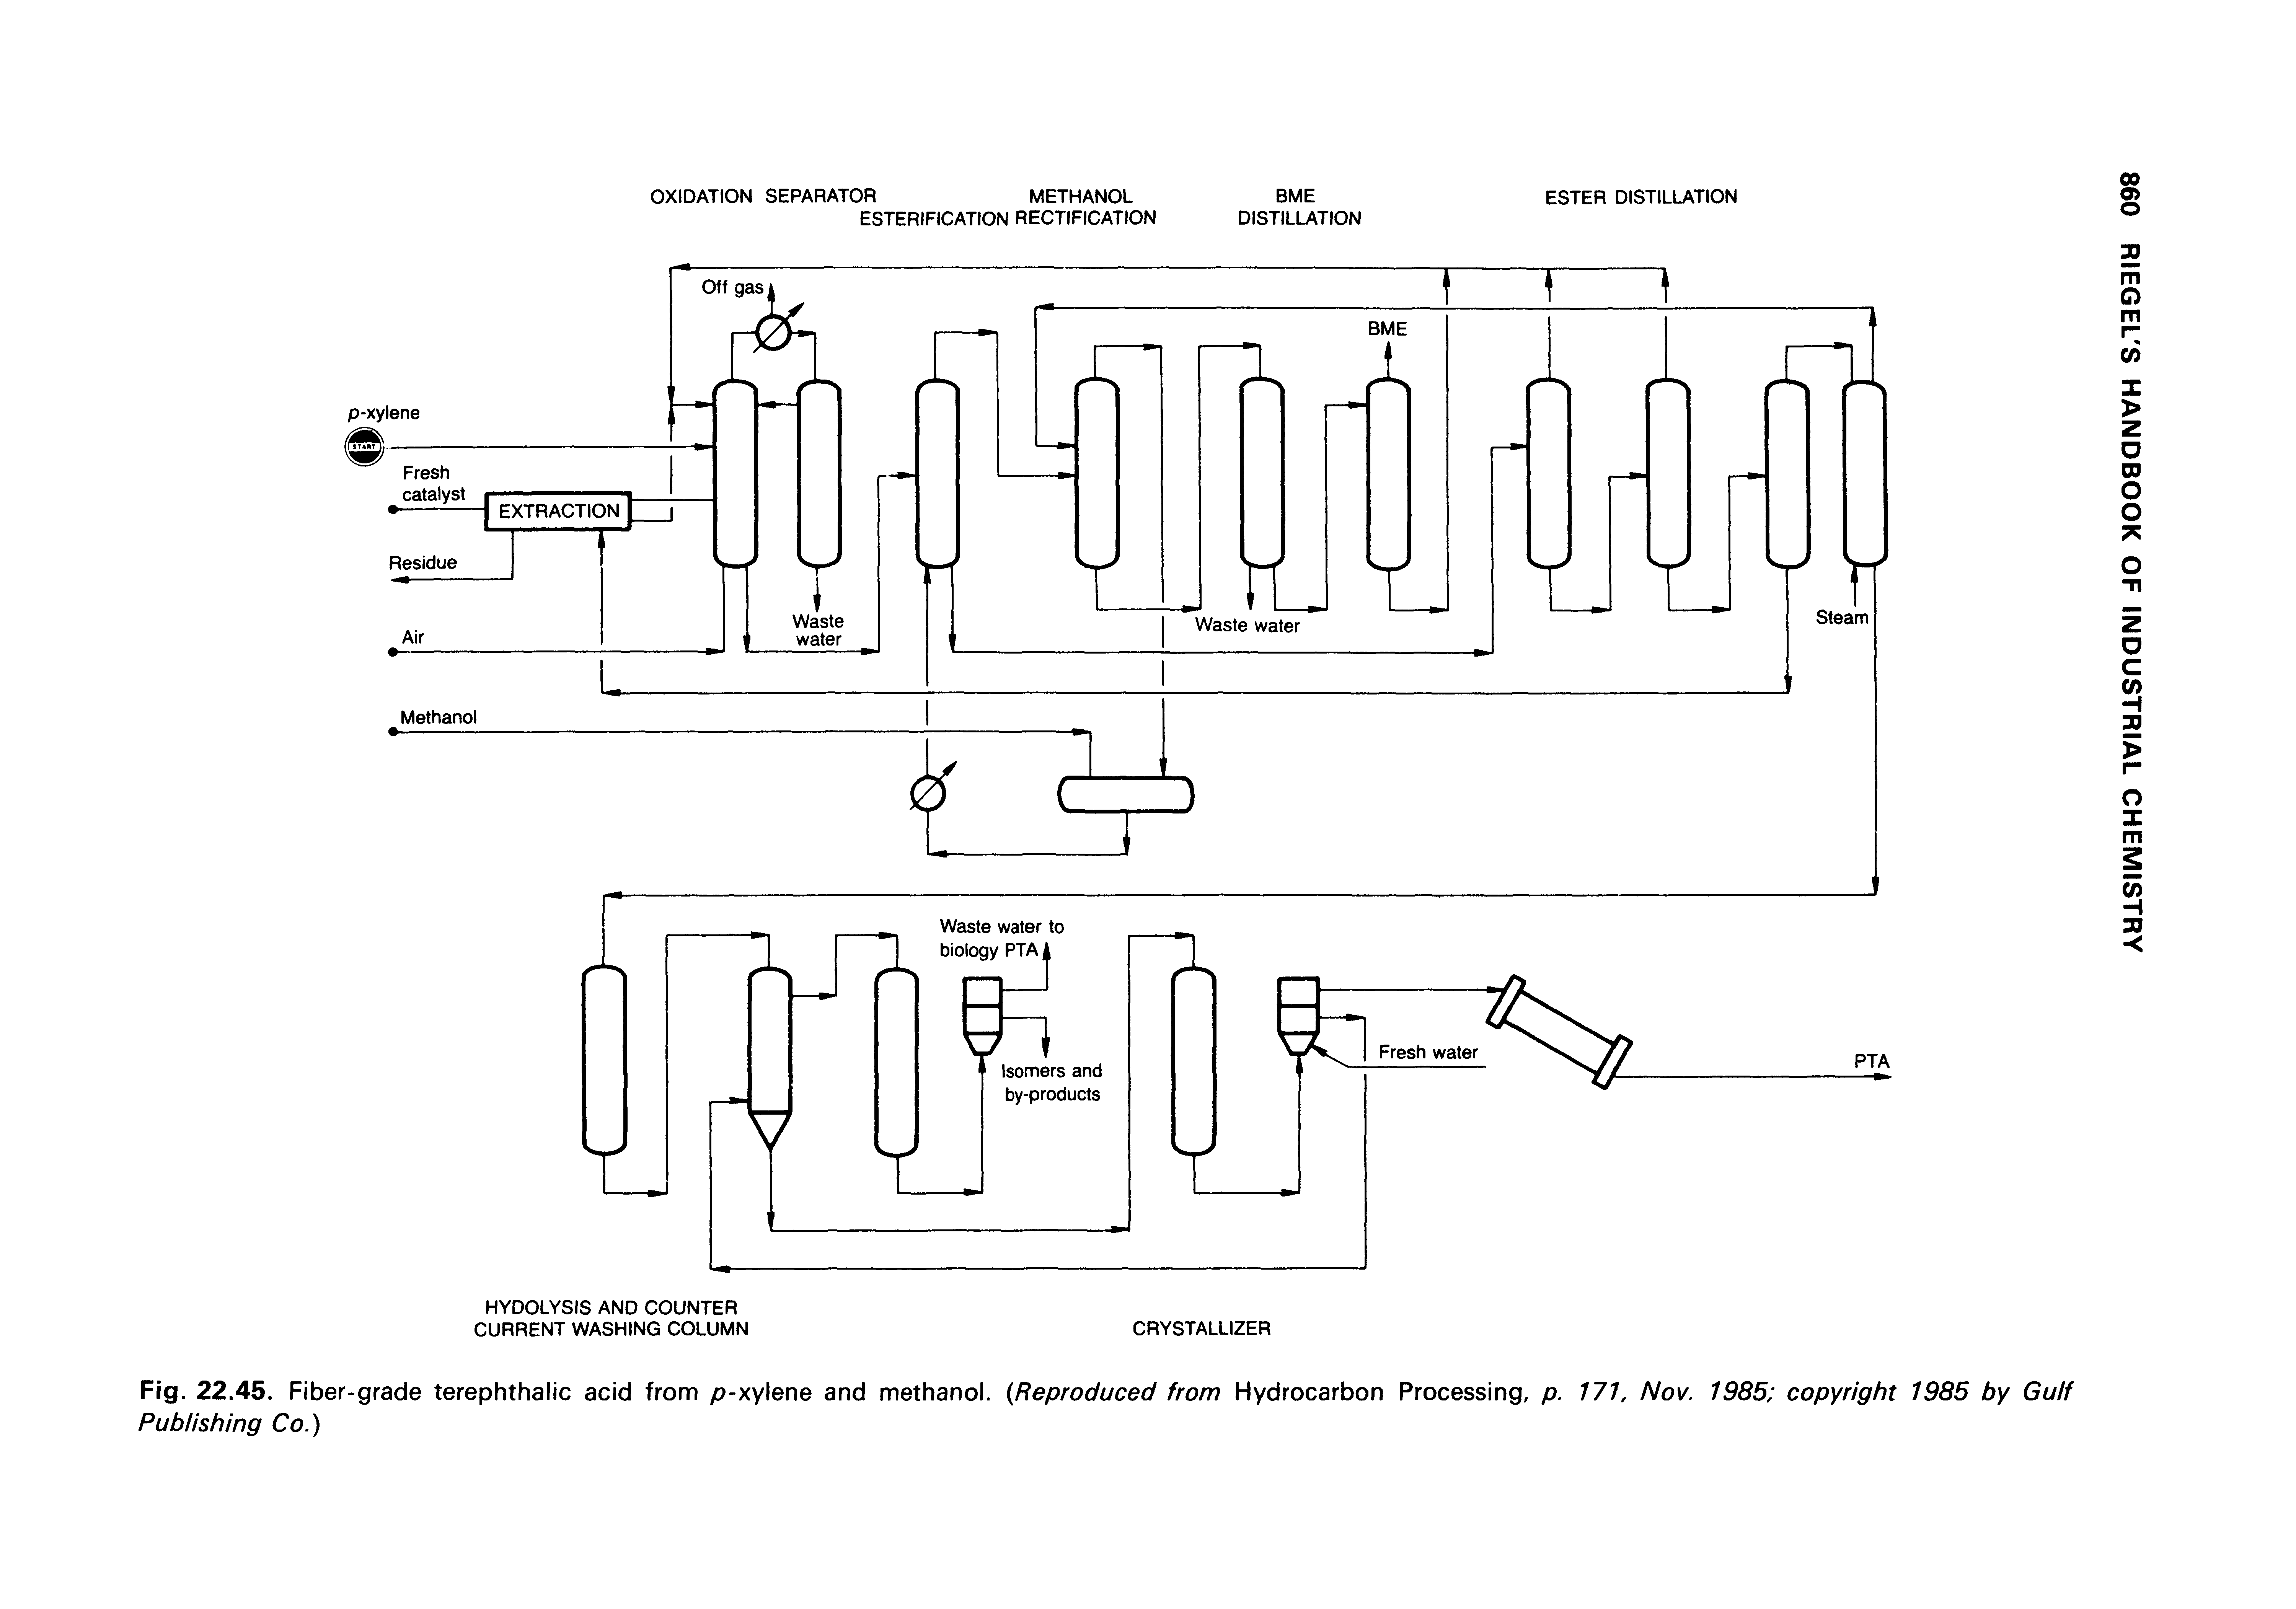 Fig. 22.45. Fiber-grade terephthalic acid from p-xylene and methanol. (Reproduced from Hydrocarbon Processing, p. 171, Nov. 1985 copyright 1985 by Gulf Publishing Co.)...